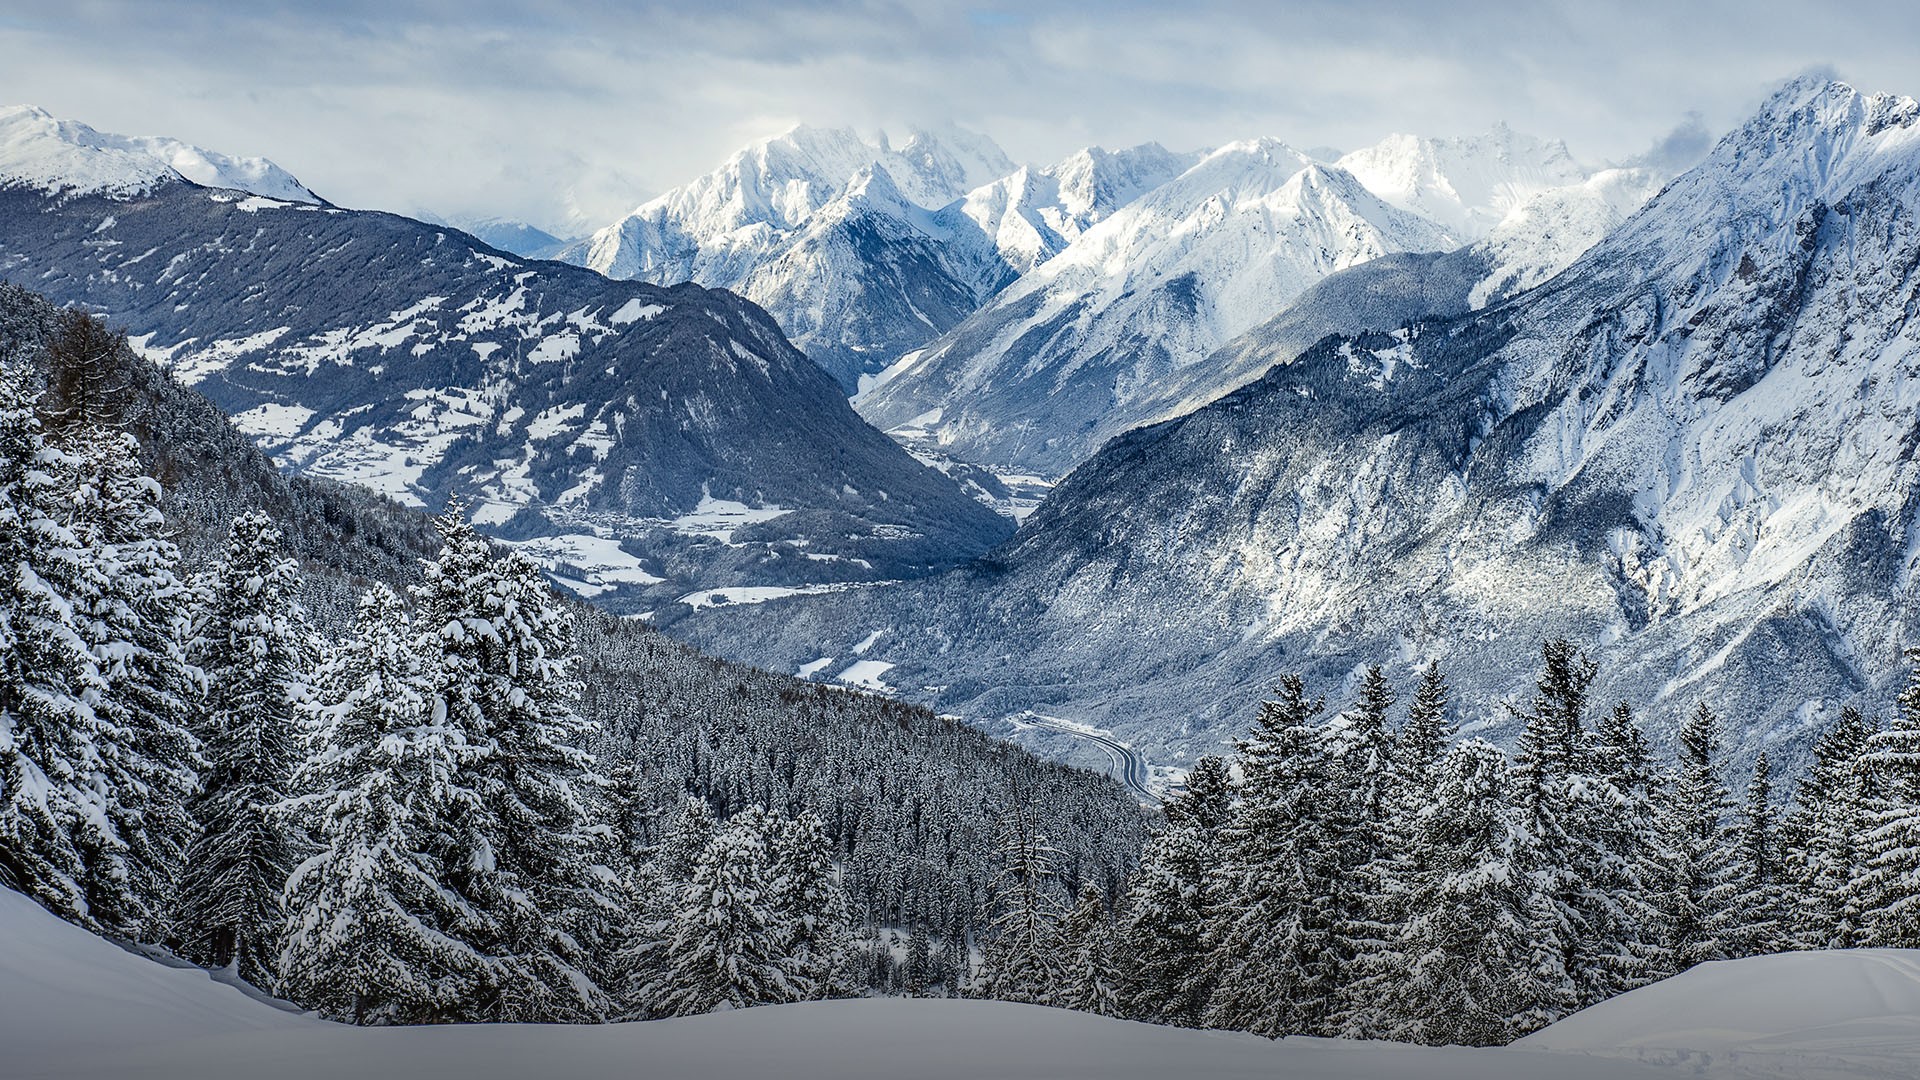 General 1920x1080 nature landscape winter mountains snowy mountain trees forest snow clouds sky rocks Tyrol Alps Italy